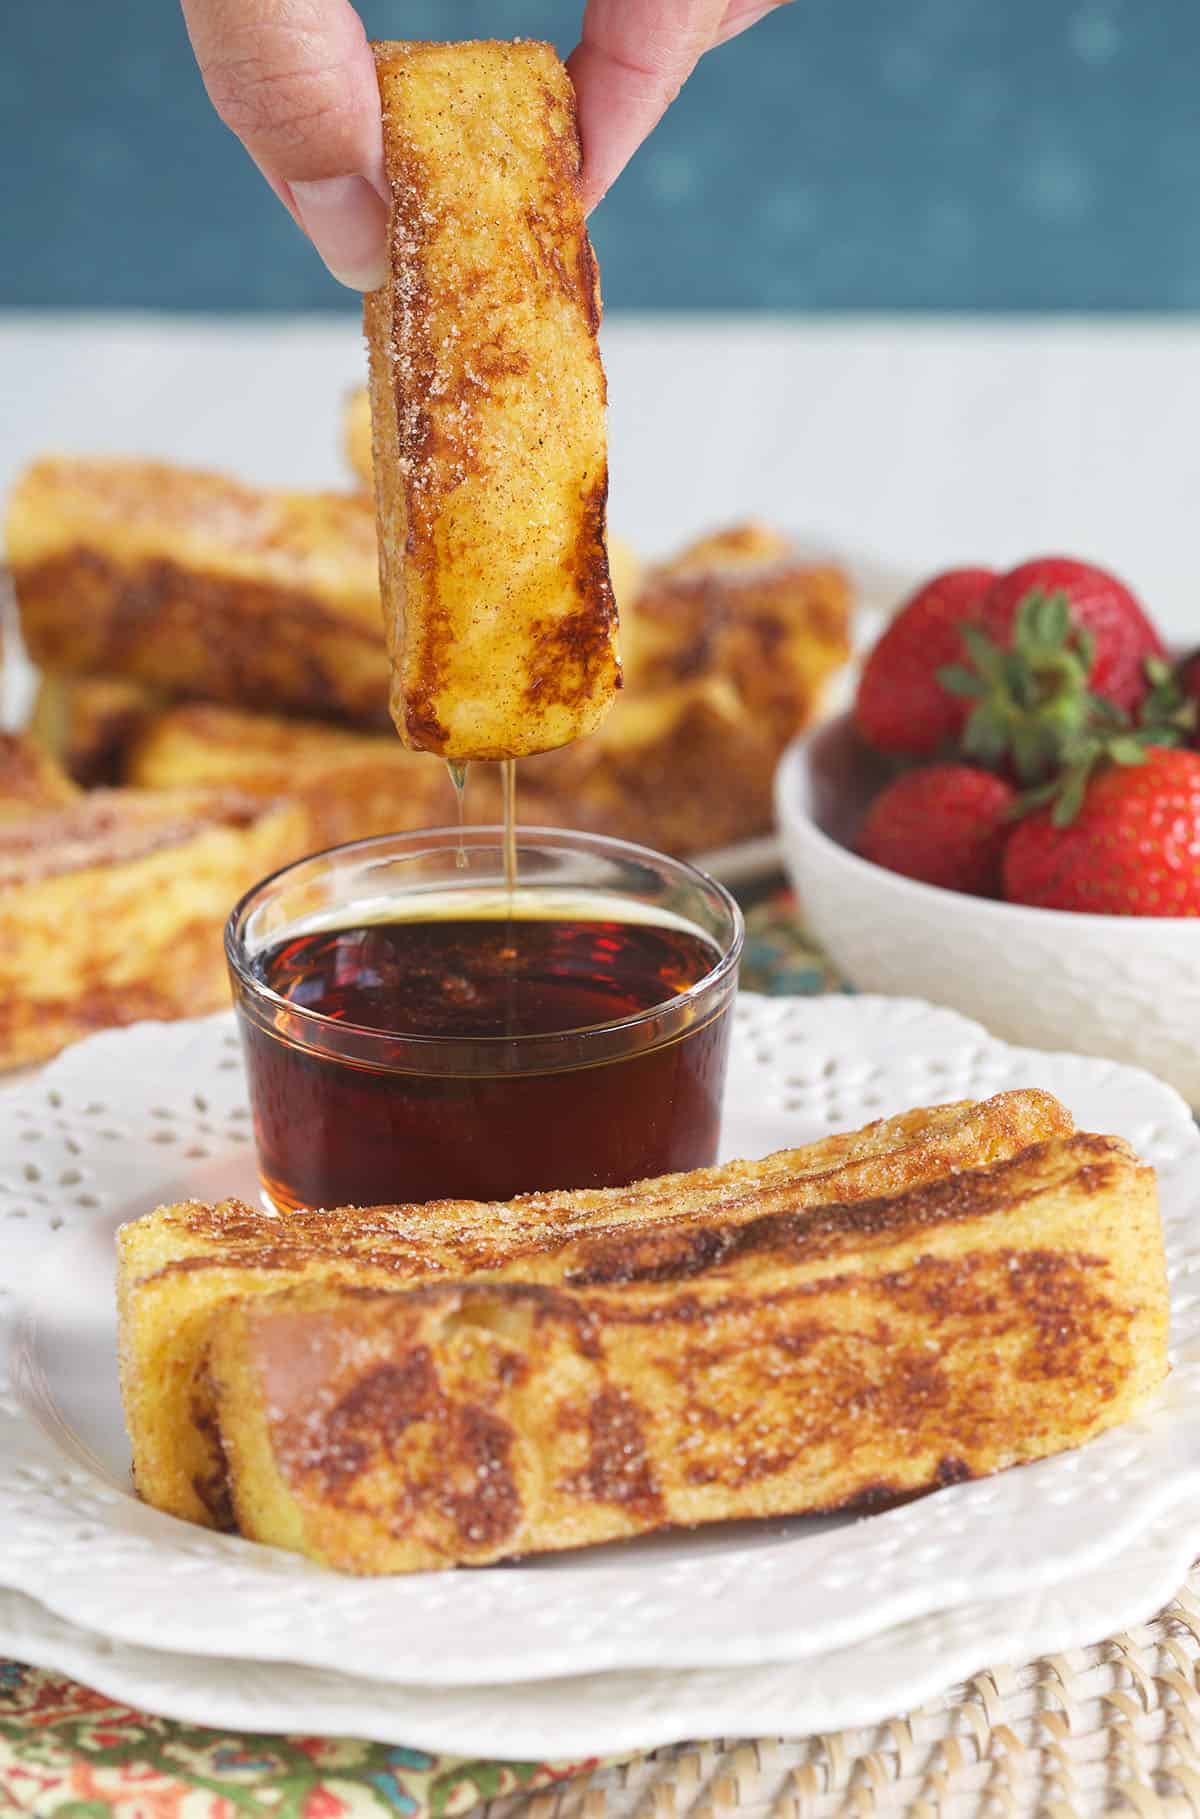 A french toast stick is being dipped in maple syrup.